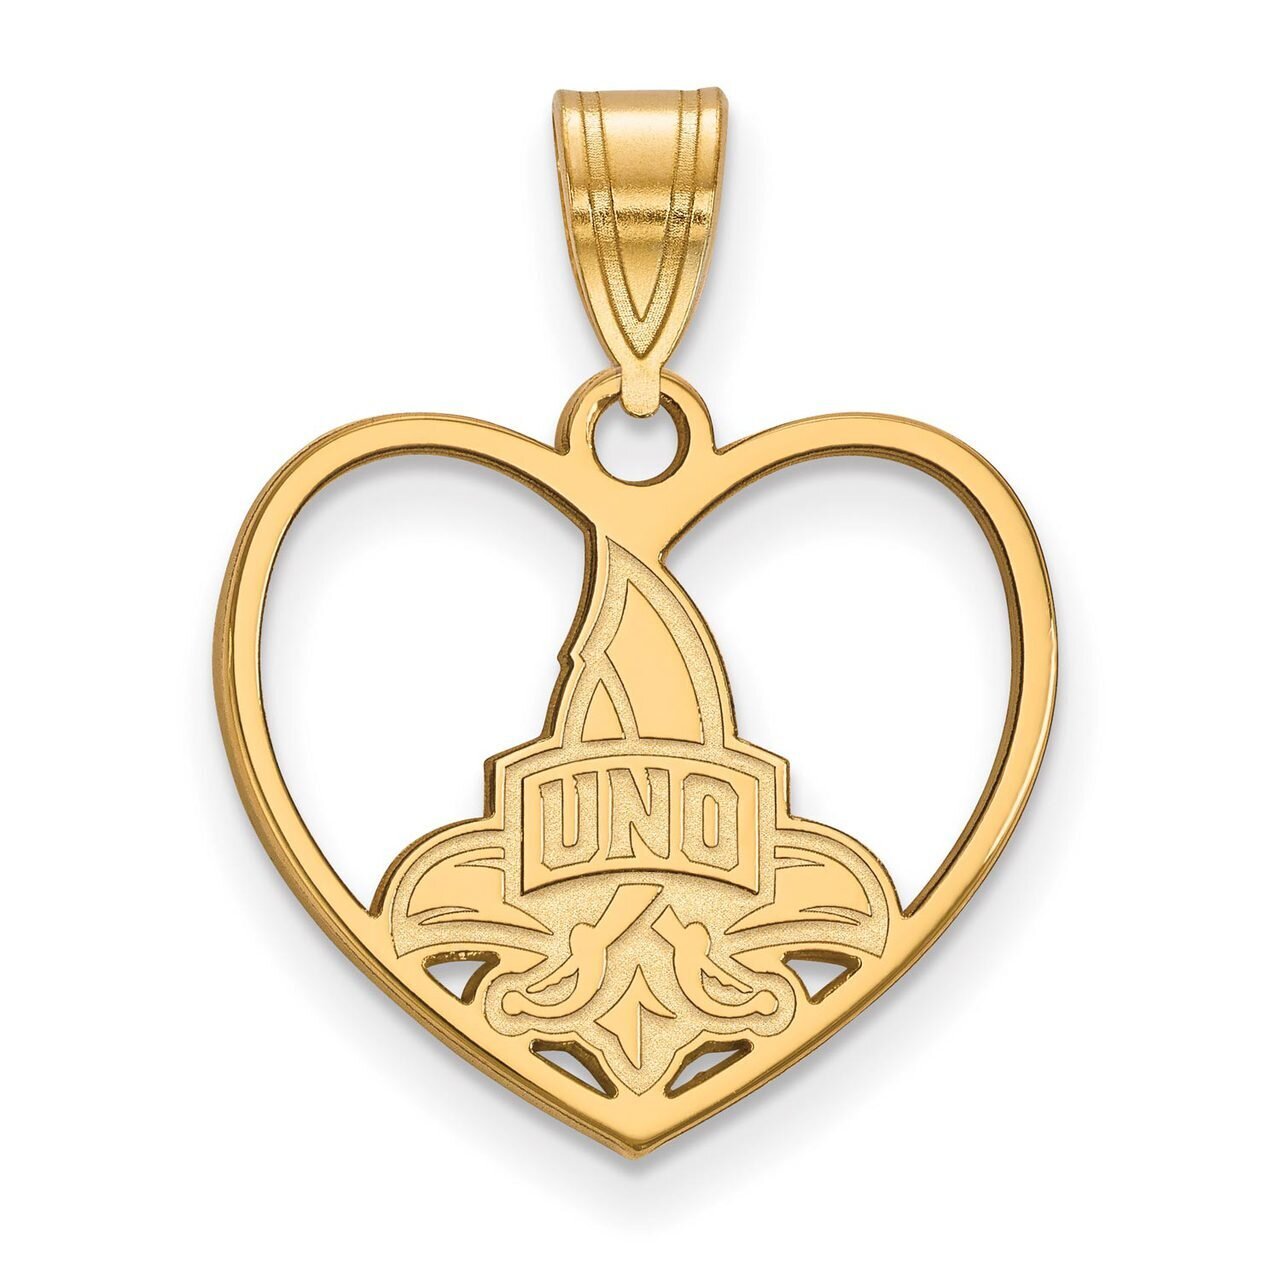 University of New Orleans Pendant in Heart Gold-plated Silver GP012UNO